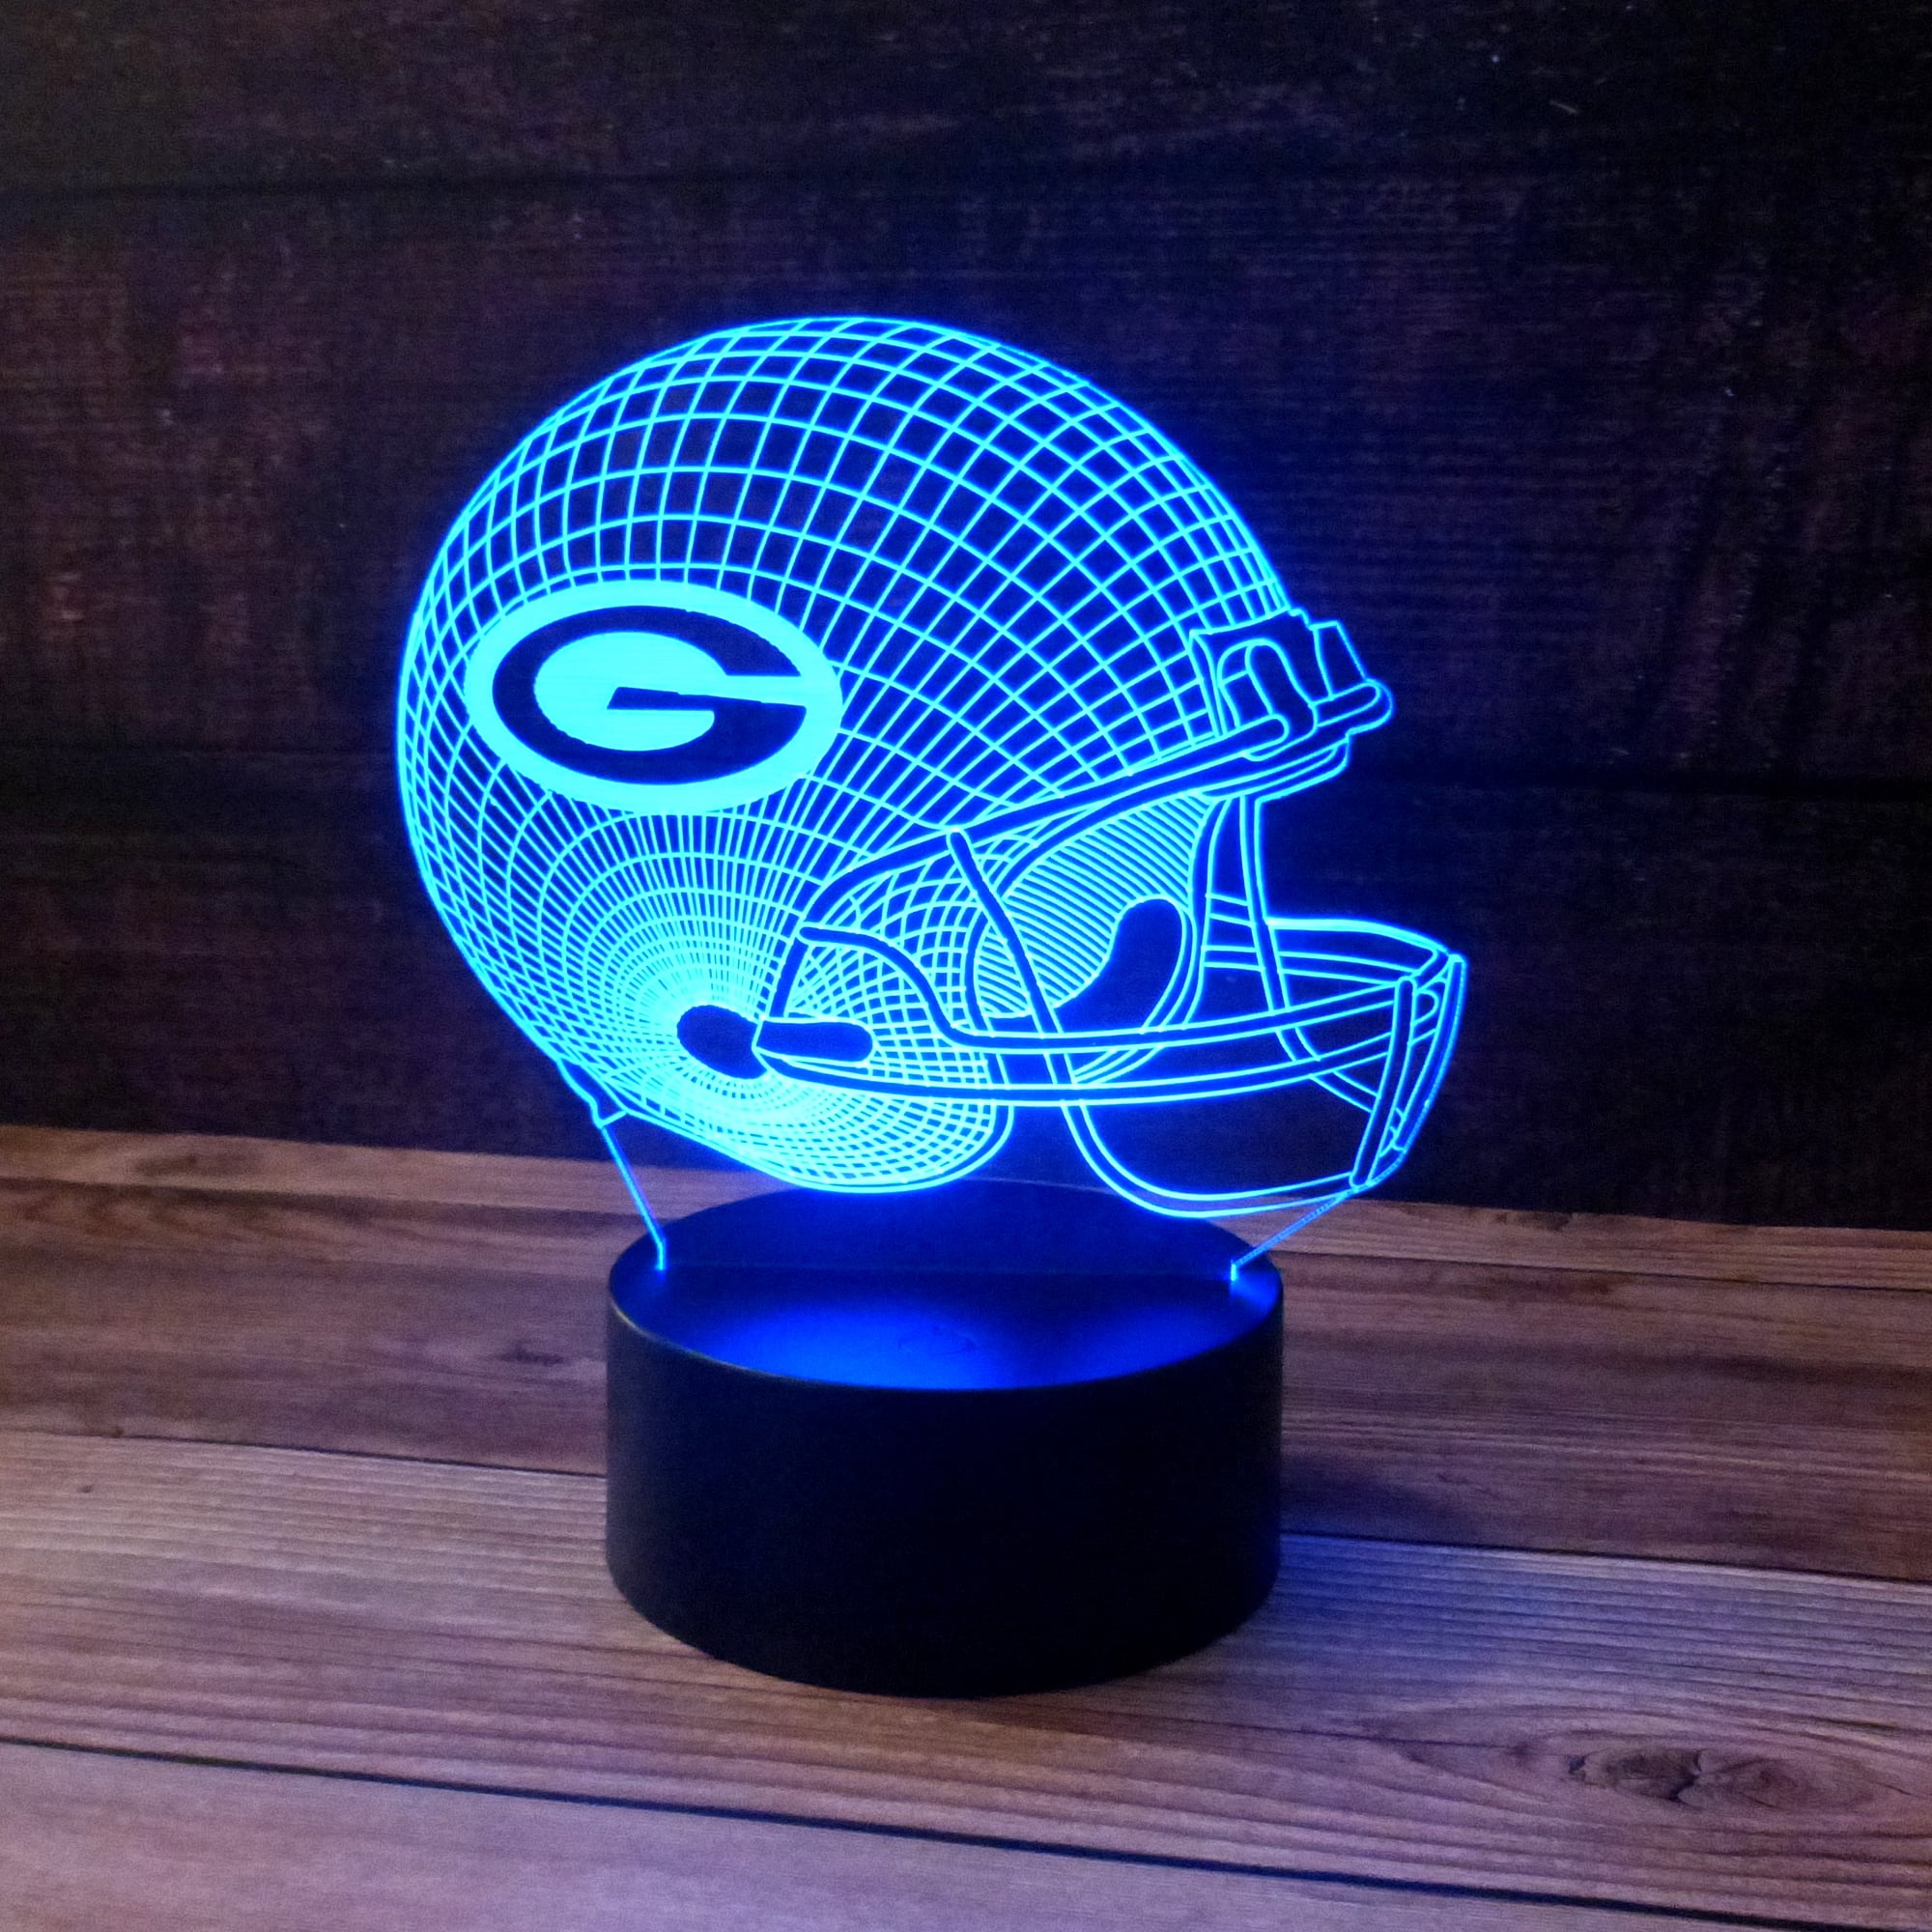 Men or Women Sports Fan Nightlight Gift for Kids Ikavis 3D LED Night Light Football Helmet Miami Dolphins Flat Acrylic Illusion Lighting Lamp with 7 Colors and Touch Sensor Girls Boys 